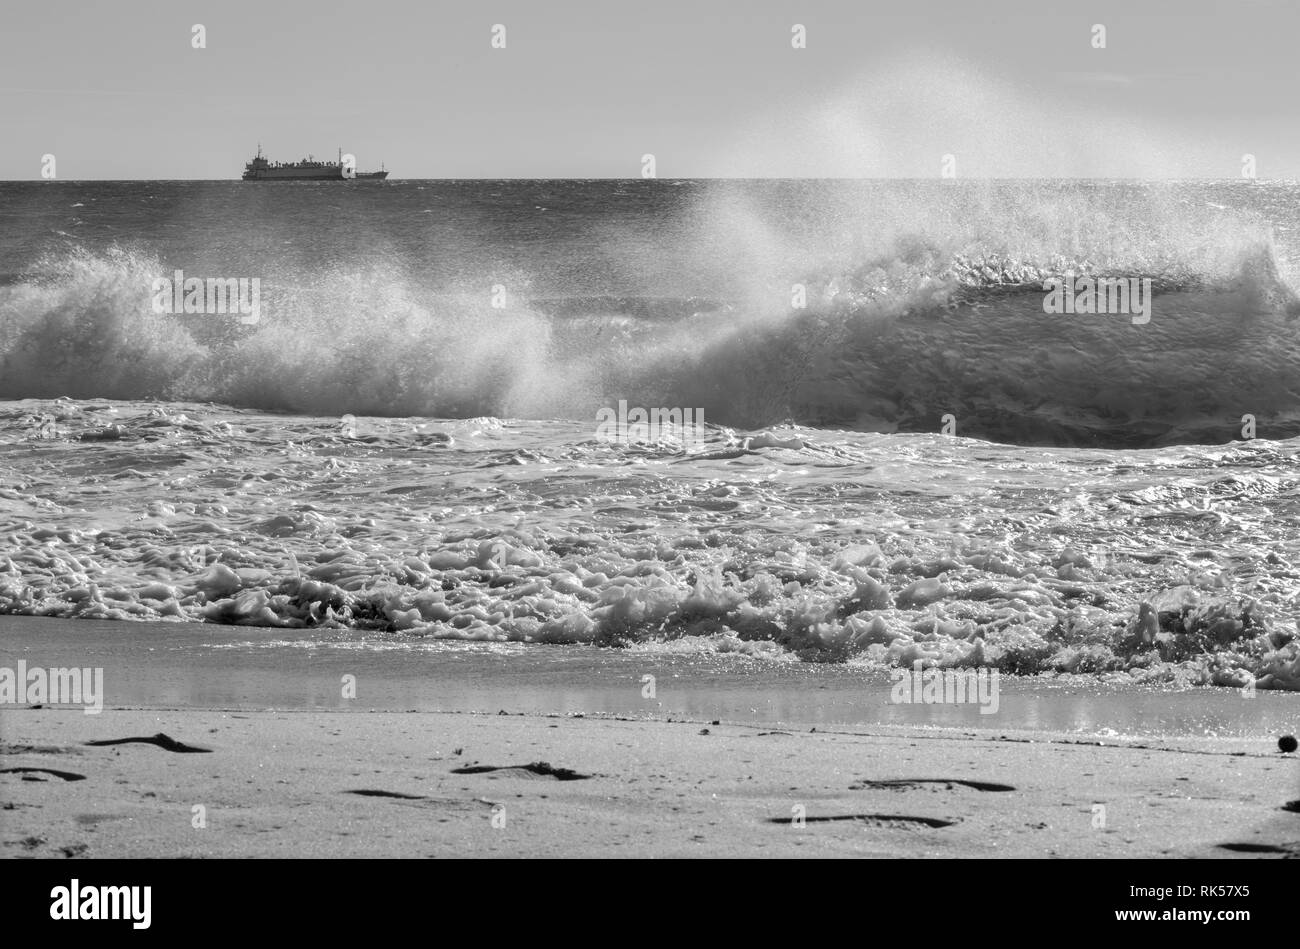 Palma de Mallorca - The big wave and the cargo in background. Stock Photo